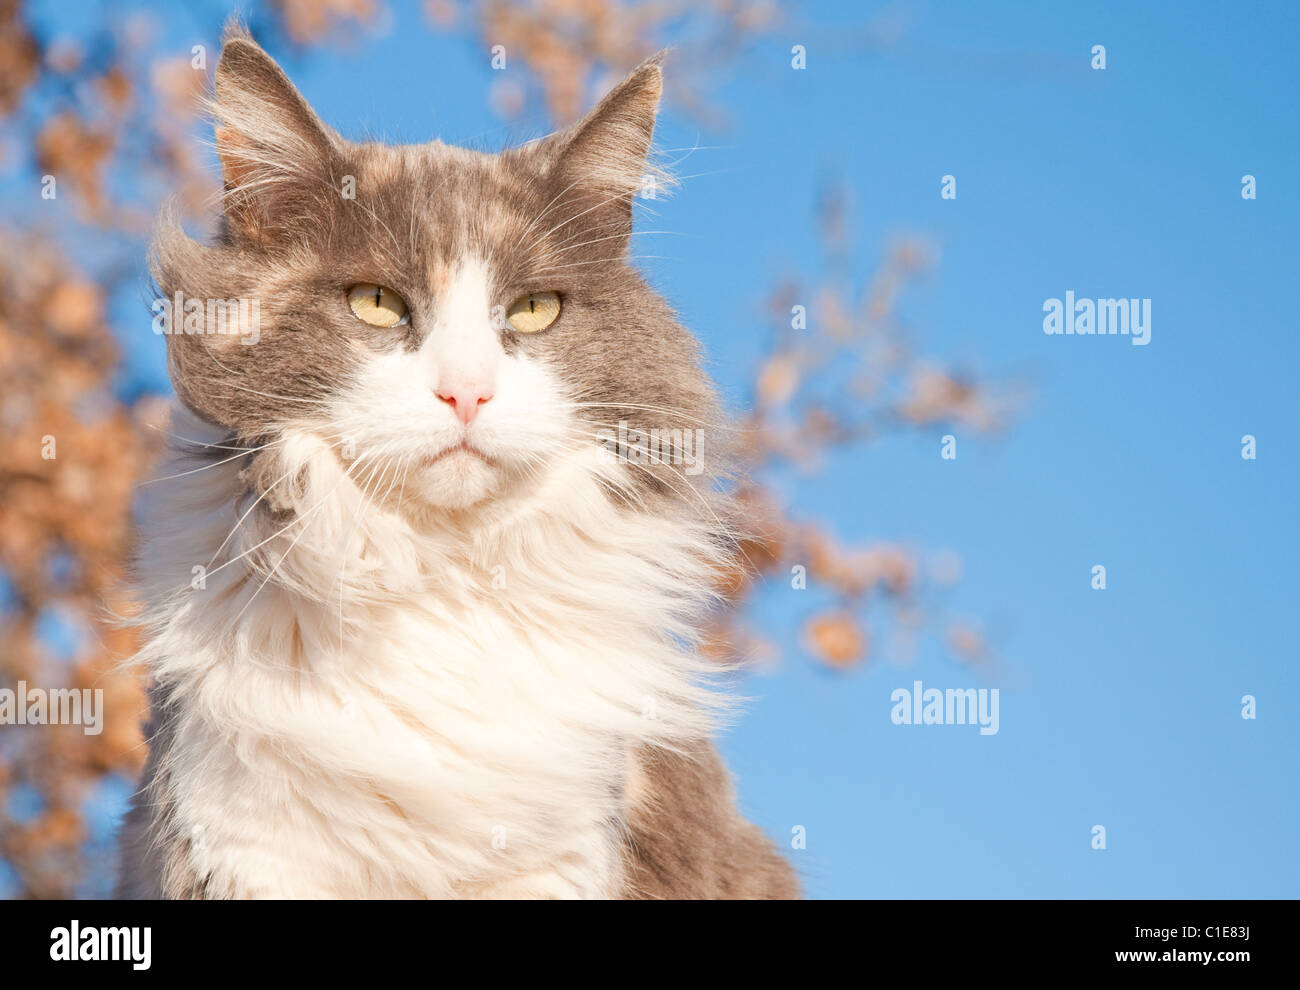 A serious looking diluted calico cat against a tree with dry leaves and blue sky Stock Photo